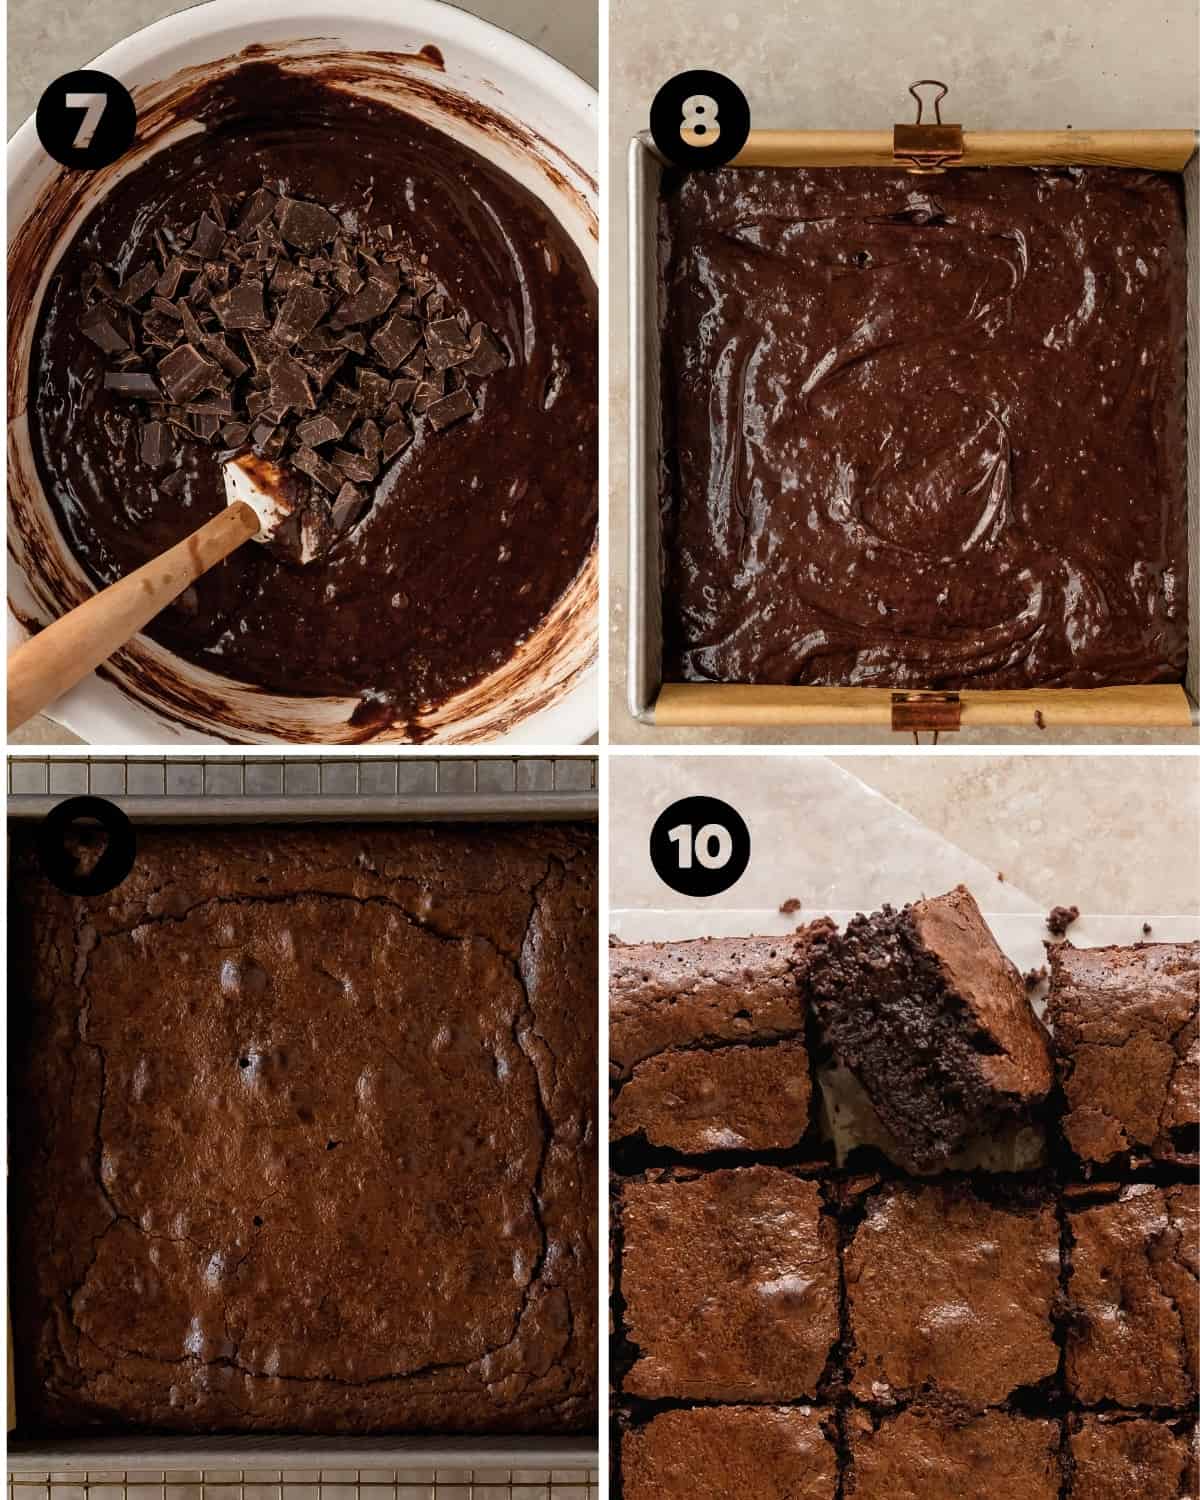 Espresso Brownies Recipe Steps: Fold in the chocolate chunks into the espresso brownie batter. Pour the batter into the pan, bake, cool and enjoy.